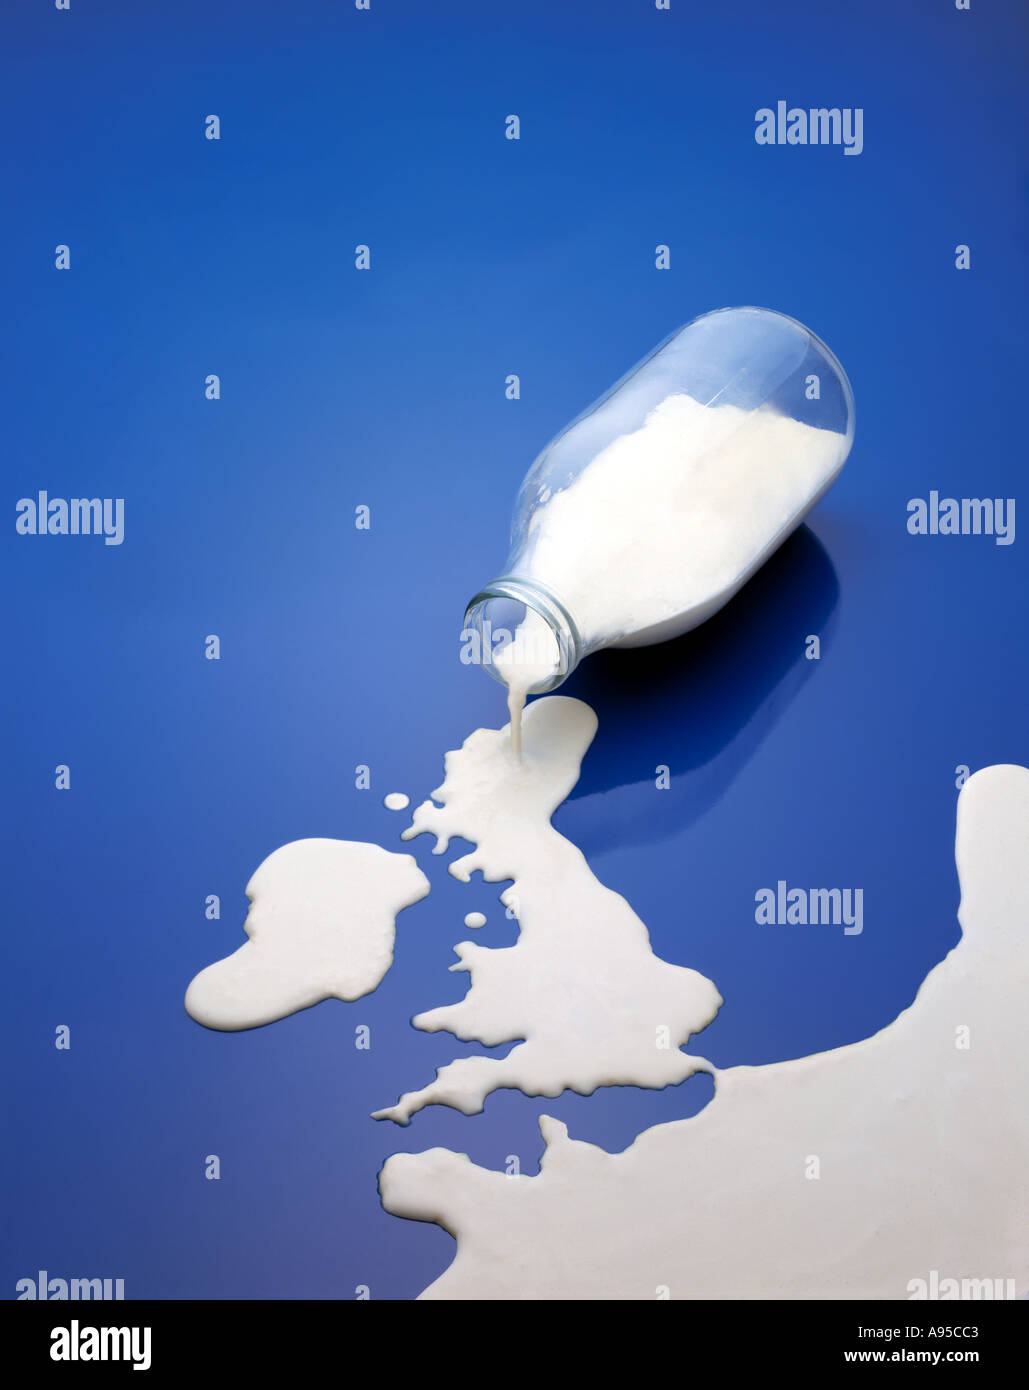 Milk spilling from bottle into shape of UK and Ireland map Stock Photo